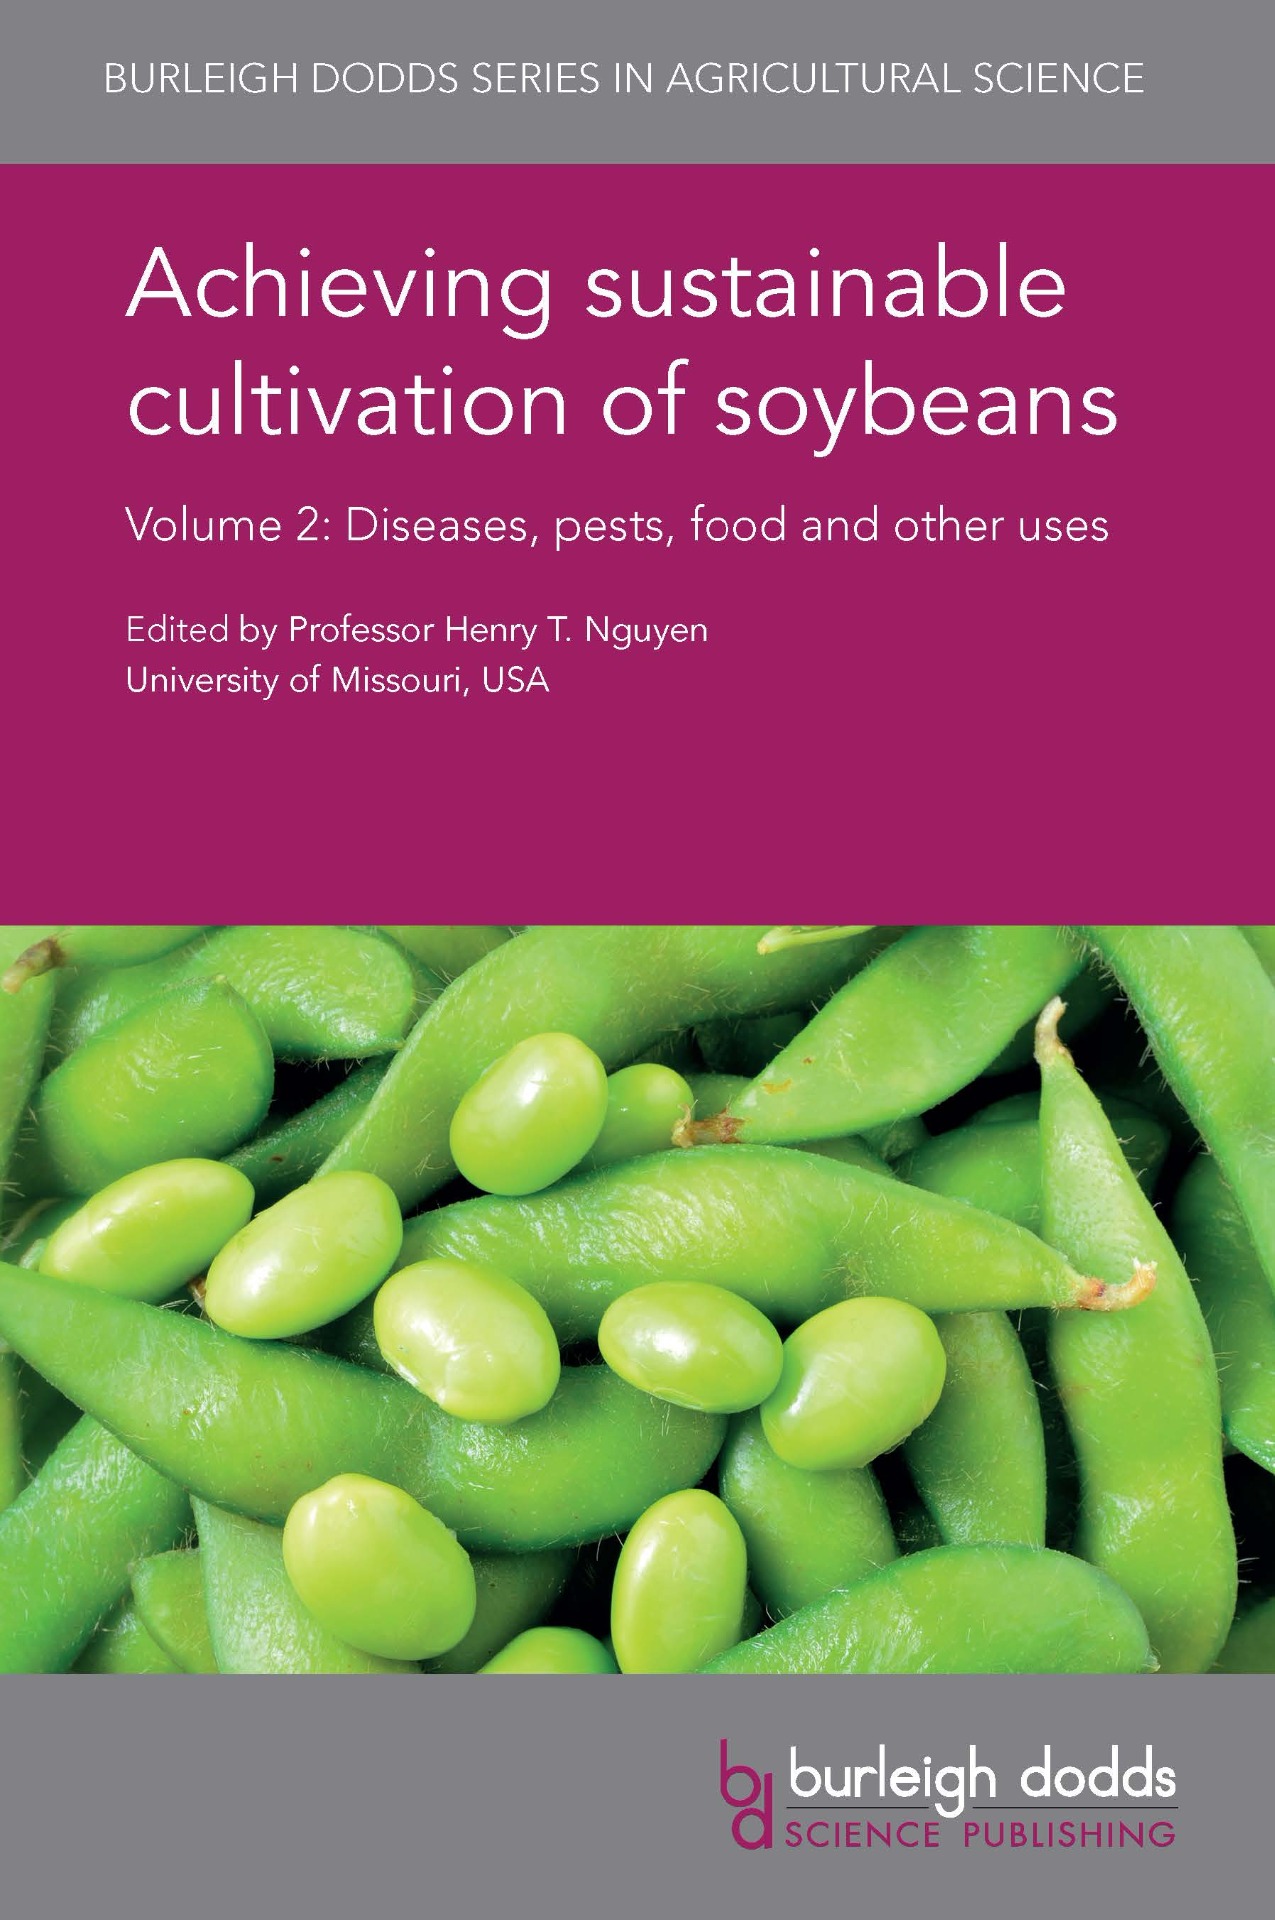 Achieving sustainable cultivation of soybeans Volume 2